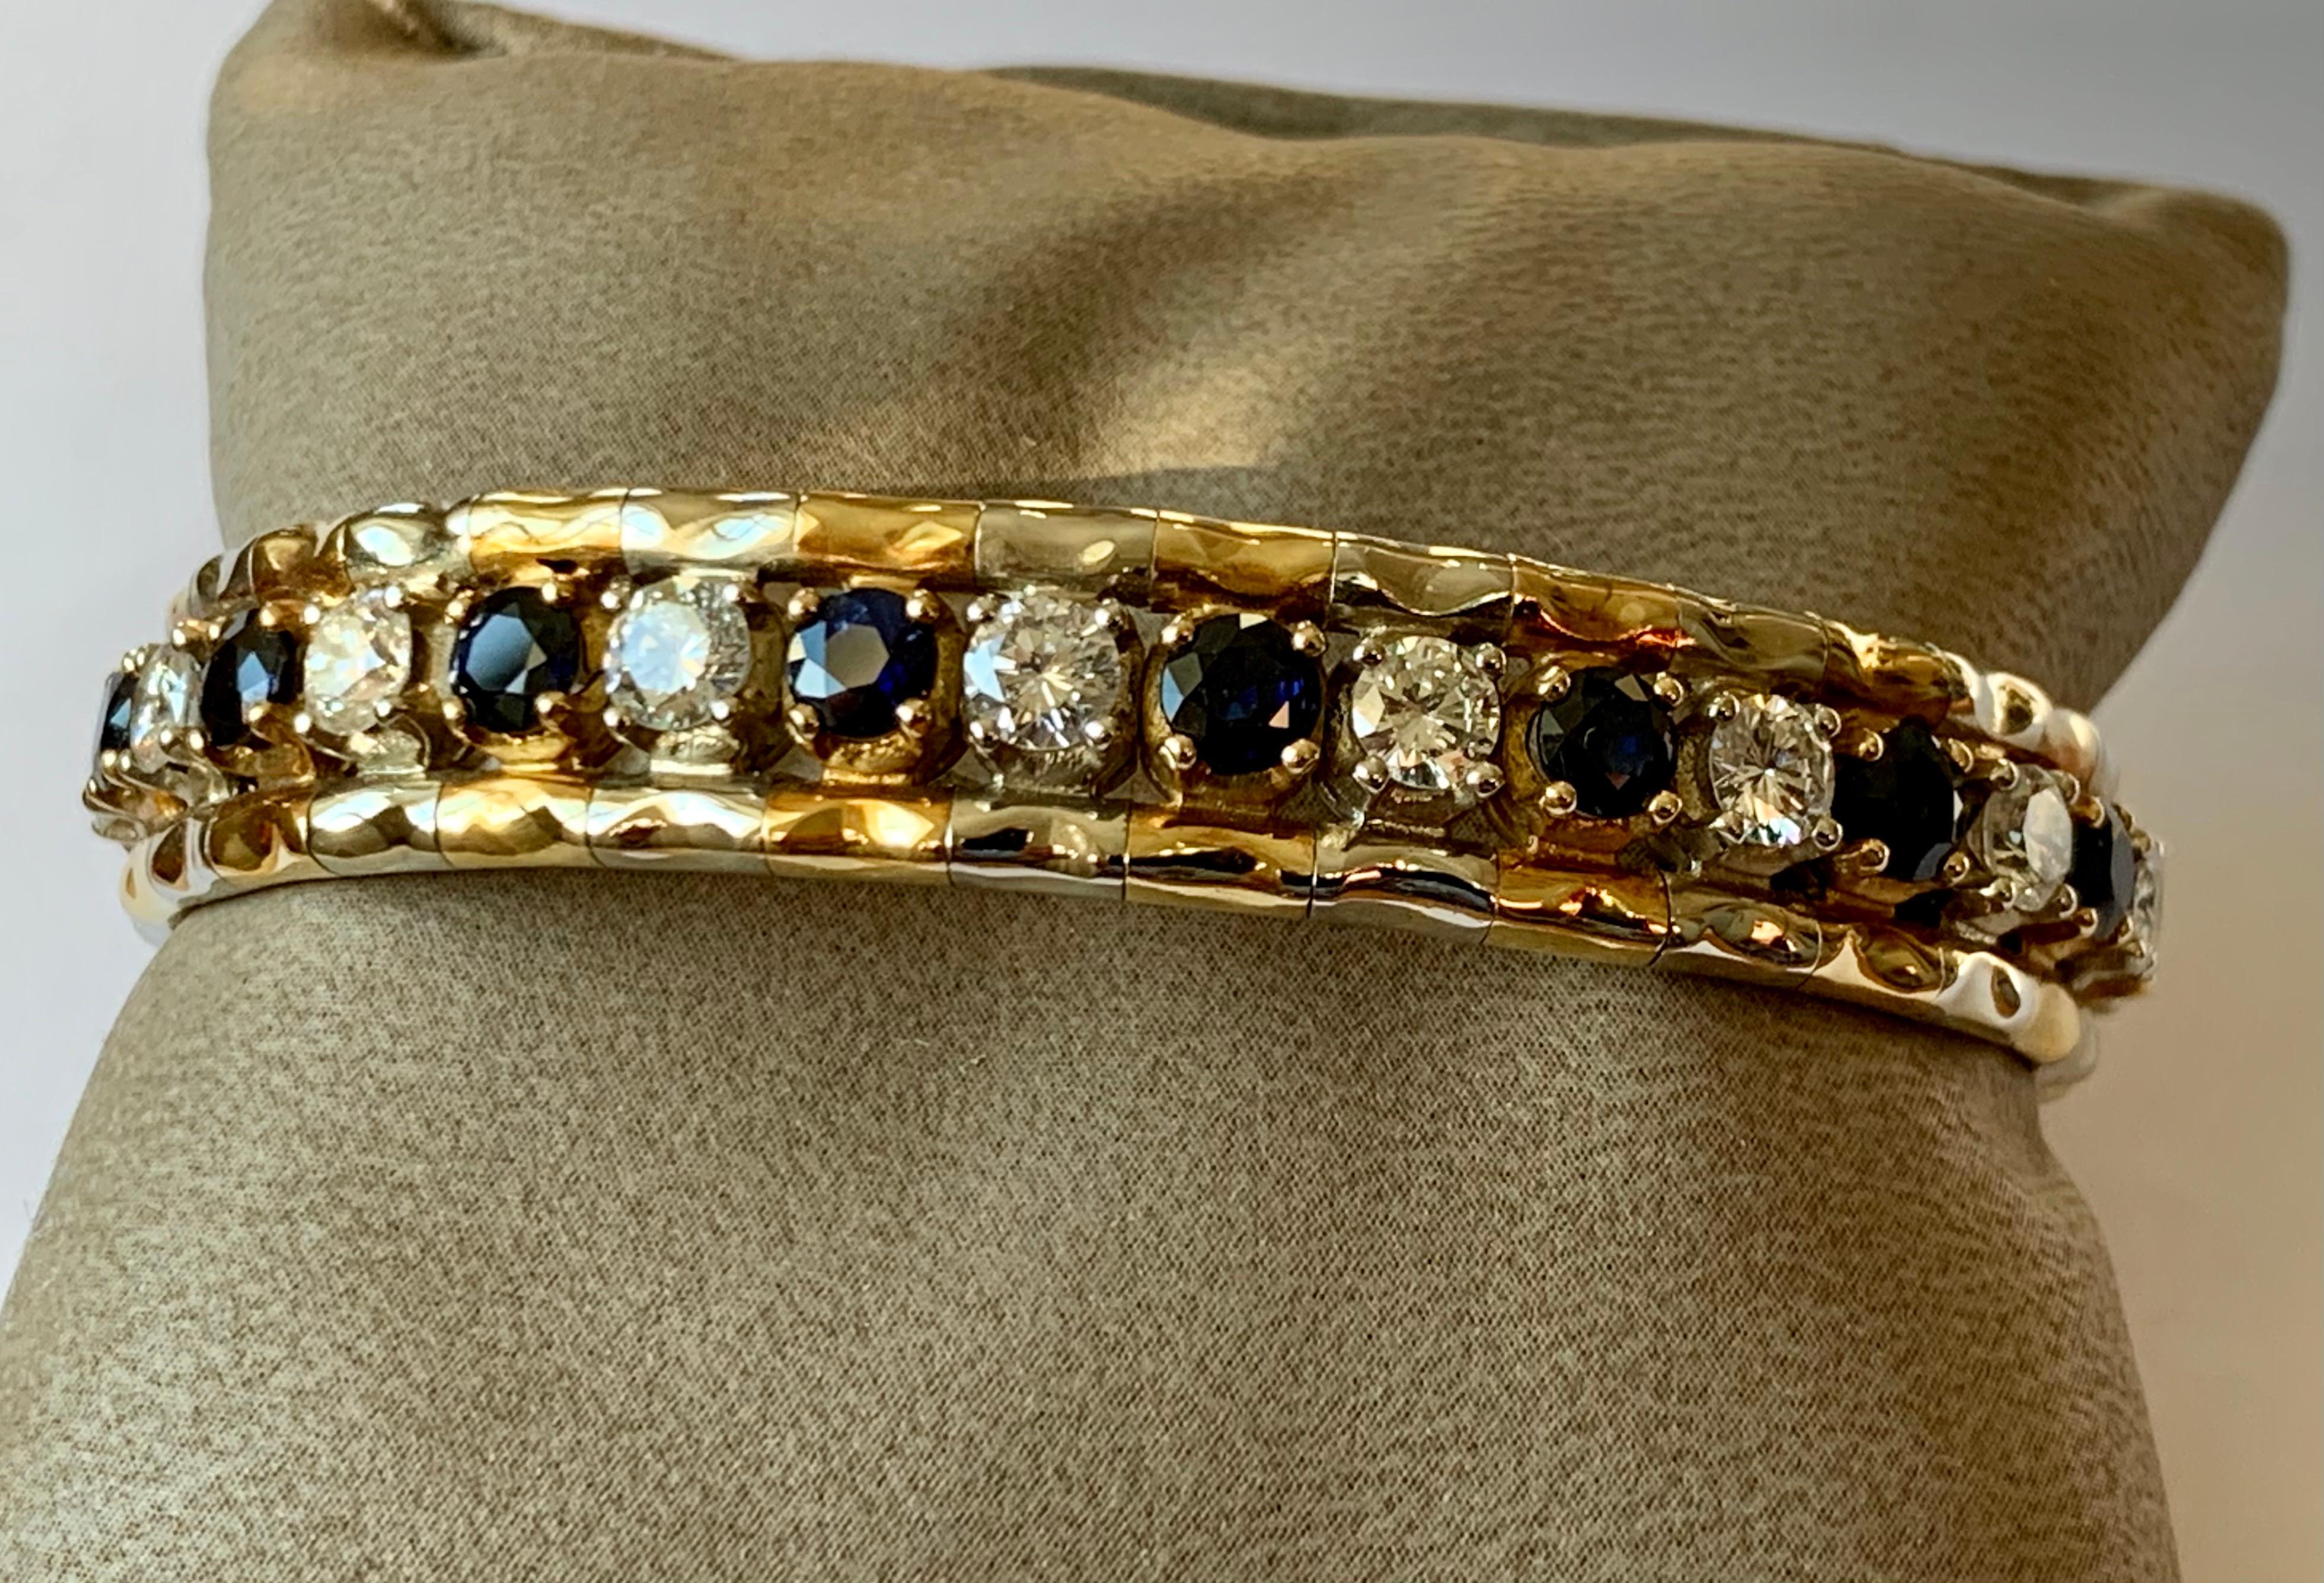 A beautiful 18 Karat yellow  and white Gold bangle bracelet featuring high quality diamonds and rich royal blue sapphires. 16 brilliant cut Diamonds weighing approximately 4.10 ct, G color, vs clarity and 16 Sapphires weighing approximately 4.30